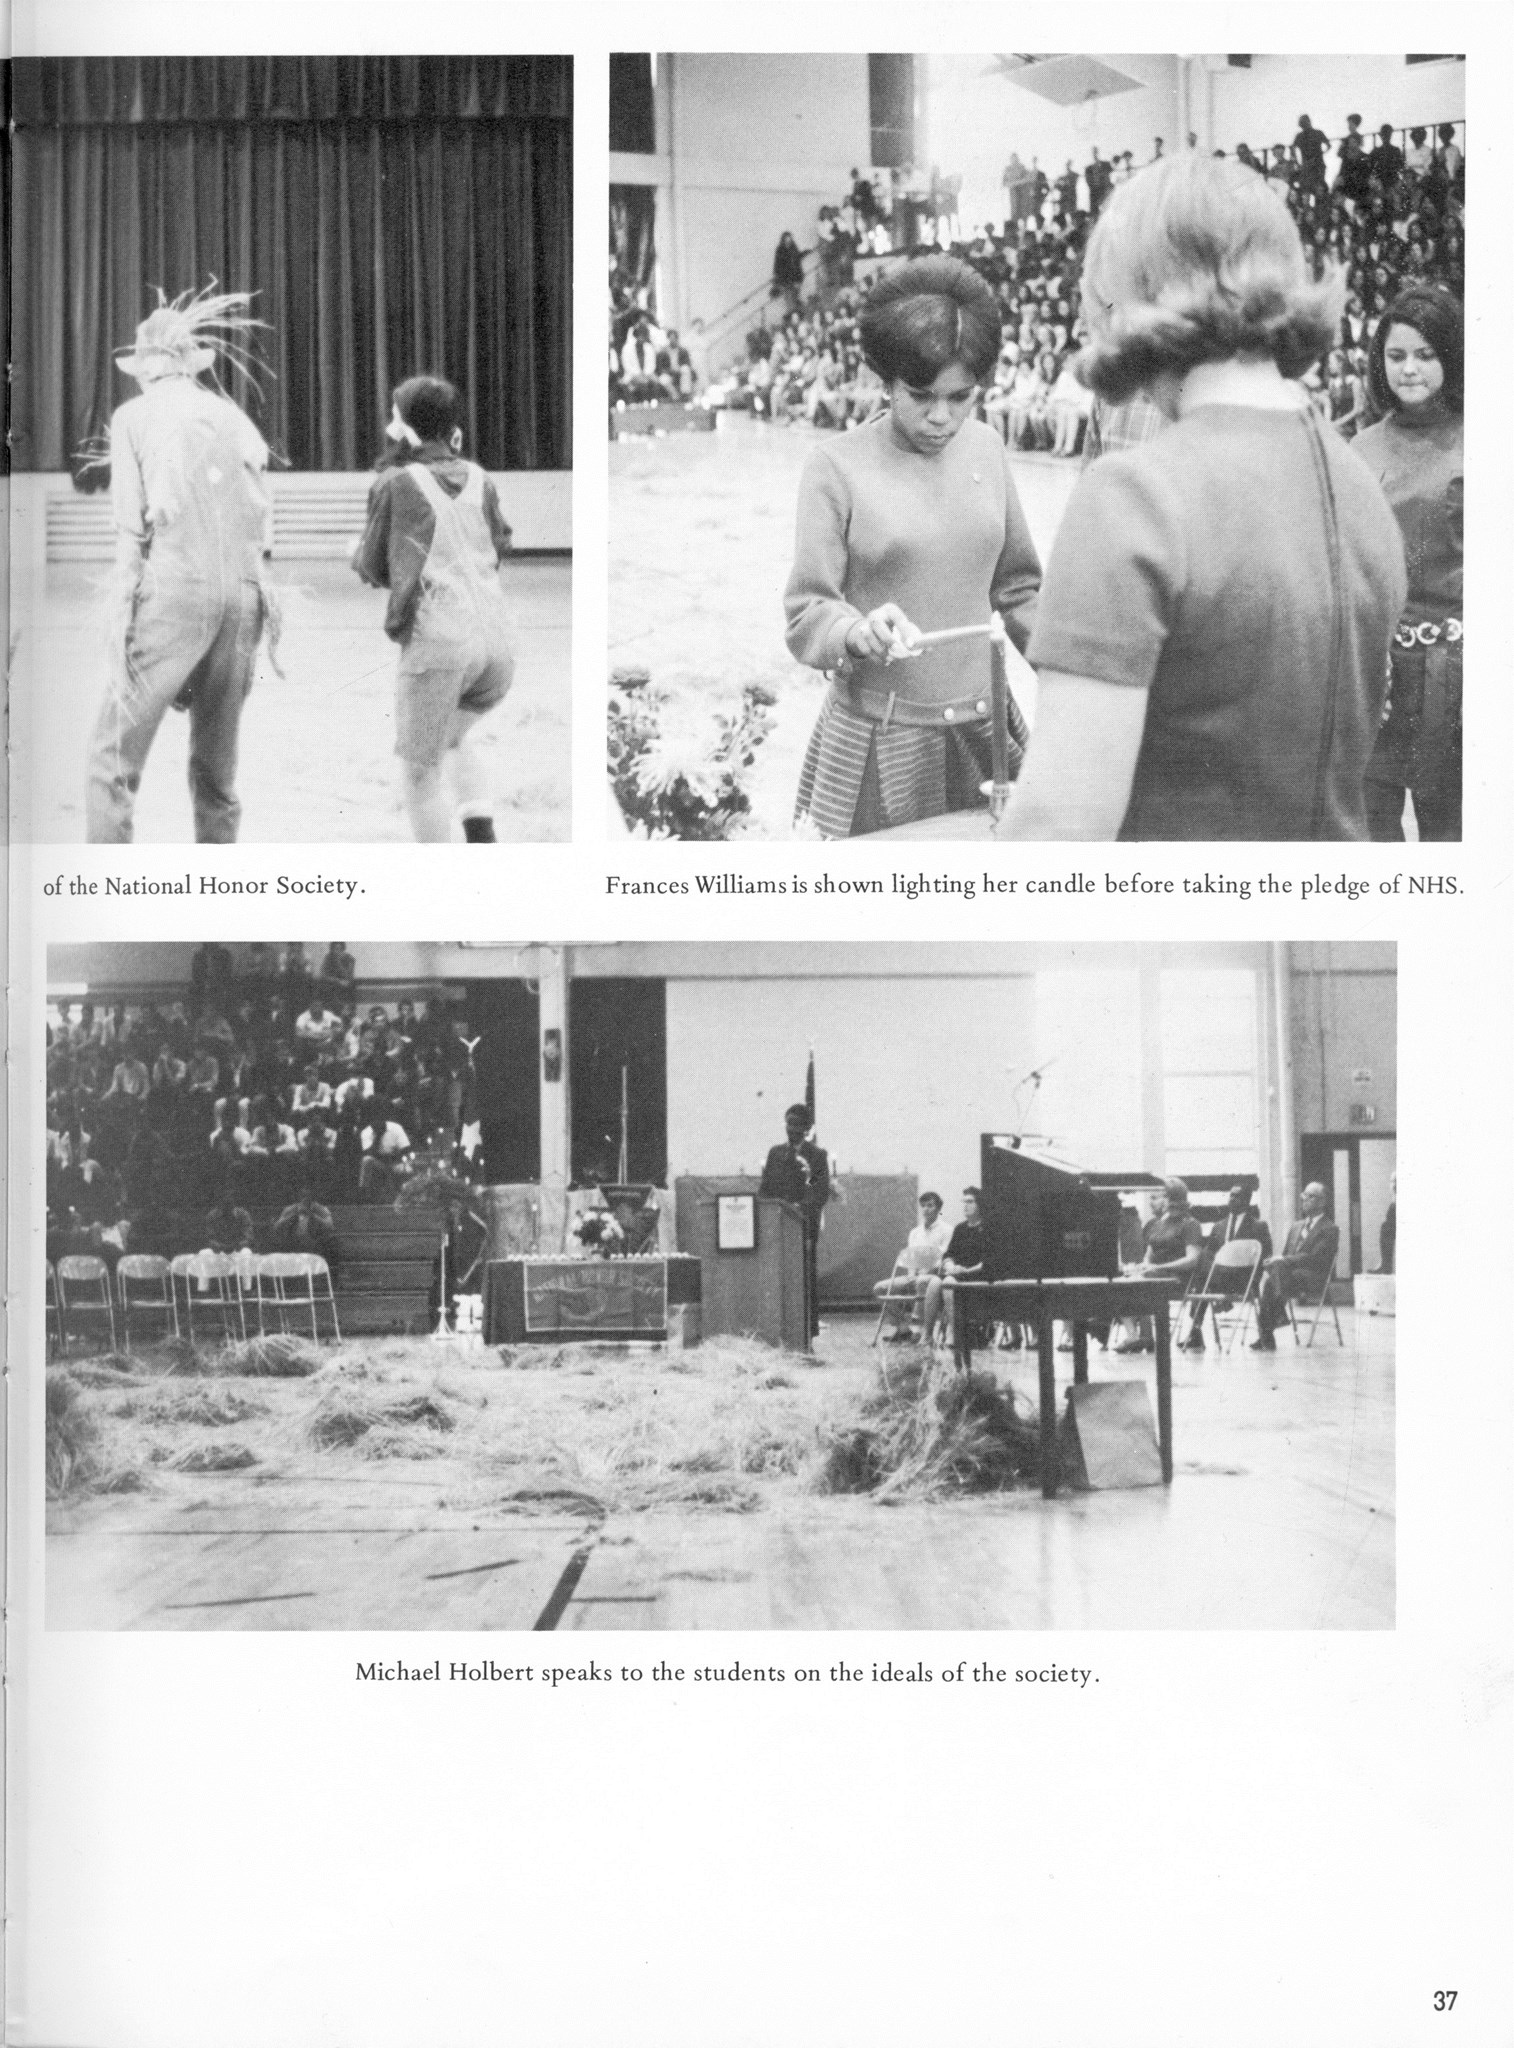 ../../../Images/Large/1970/Arclight-1970-pg0037.jpg